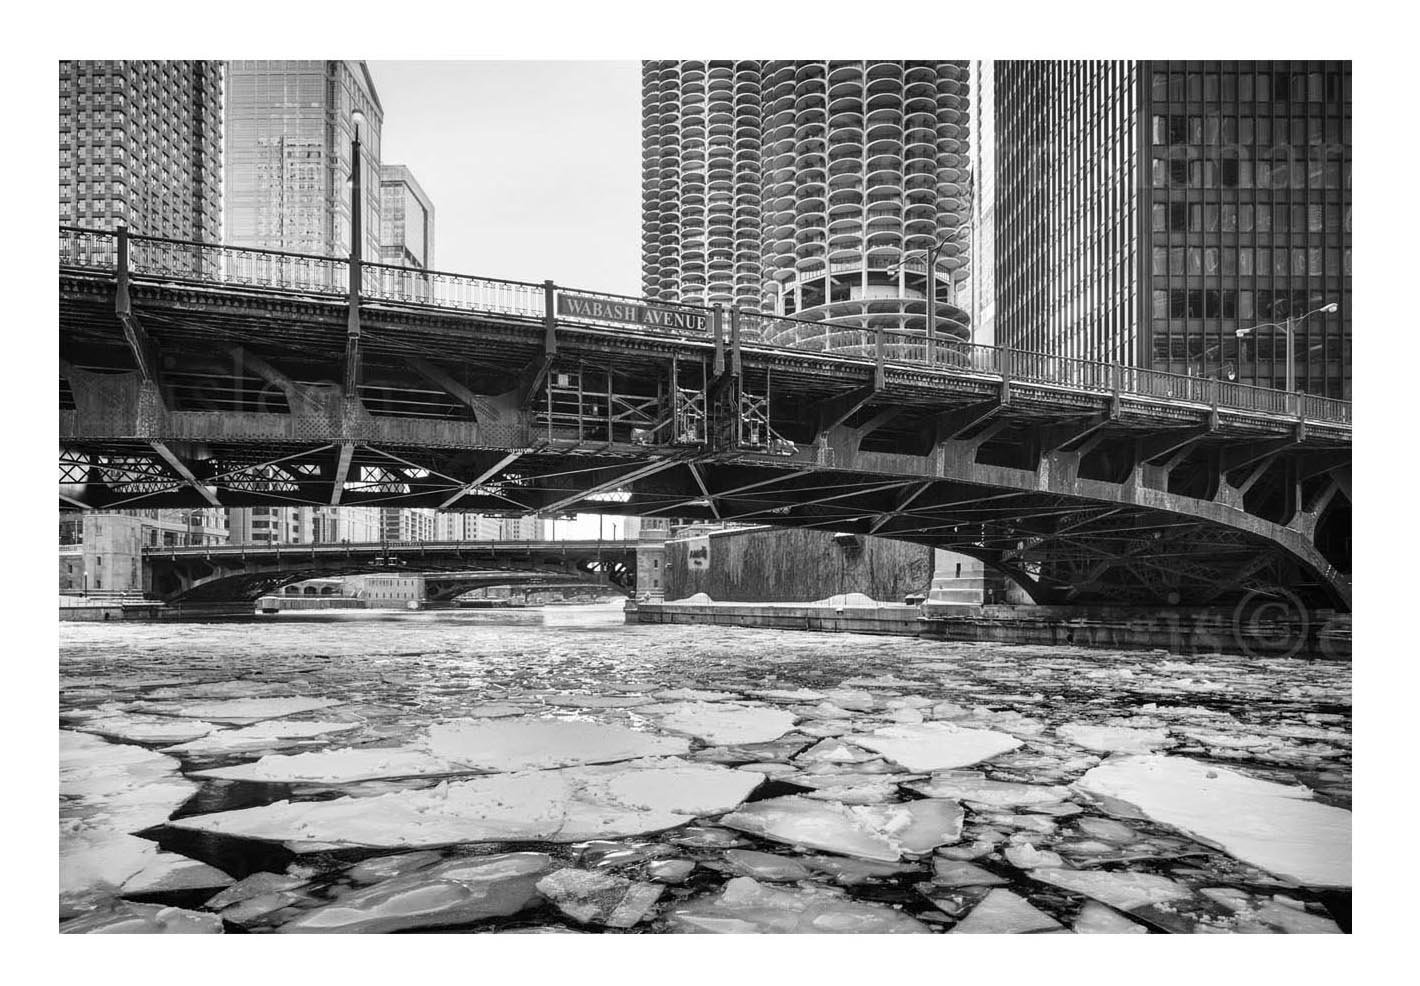 Wabash Avenue at the Chicago River